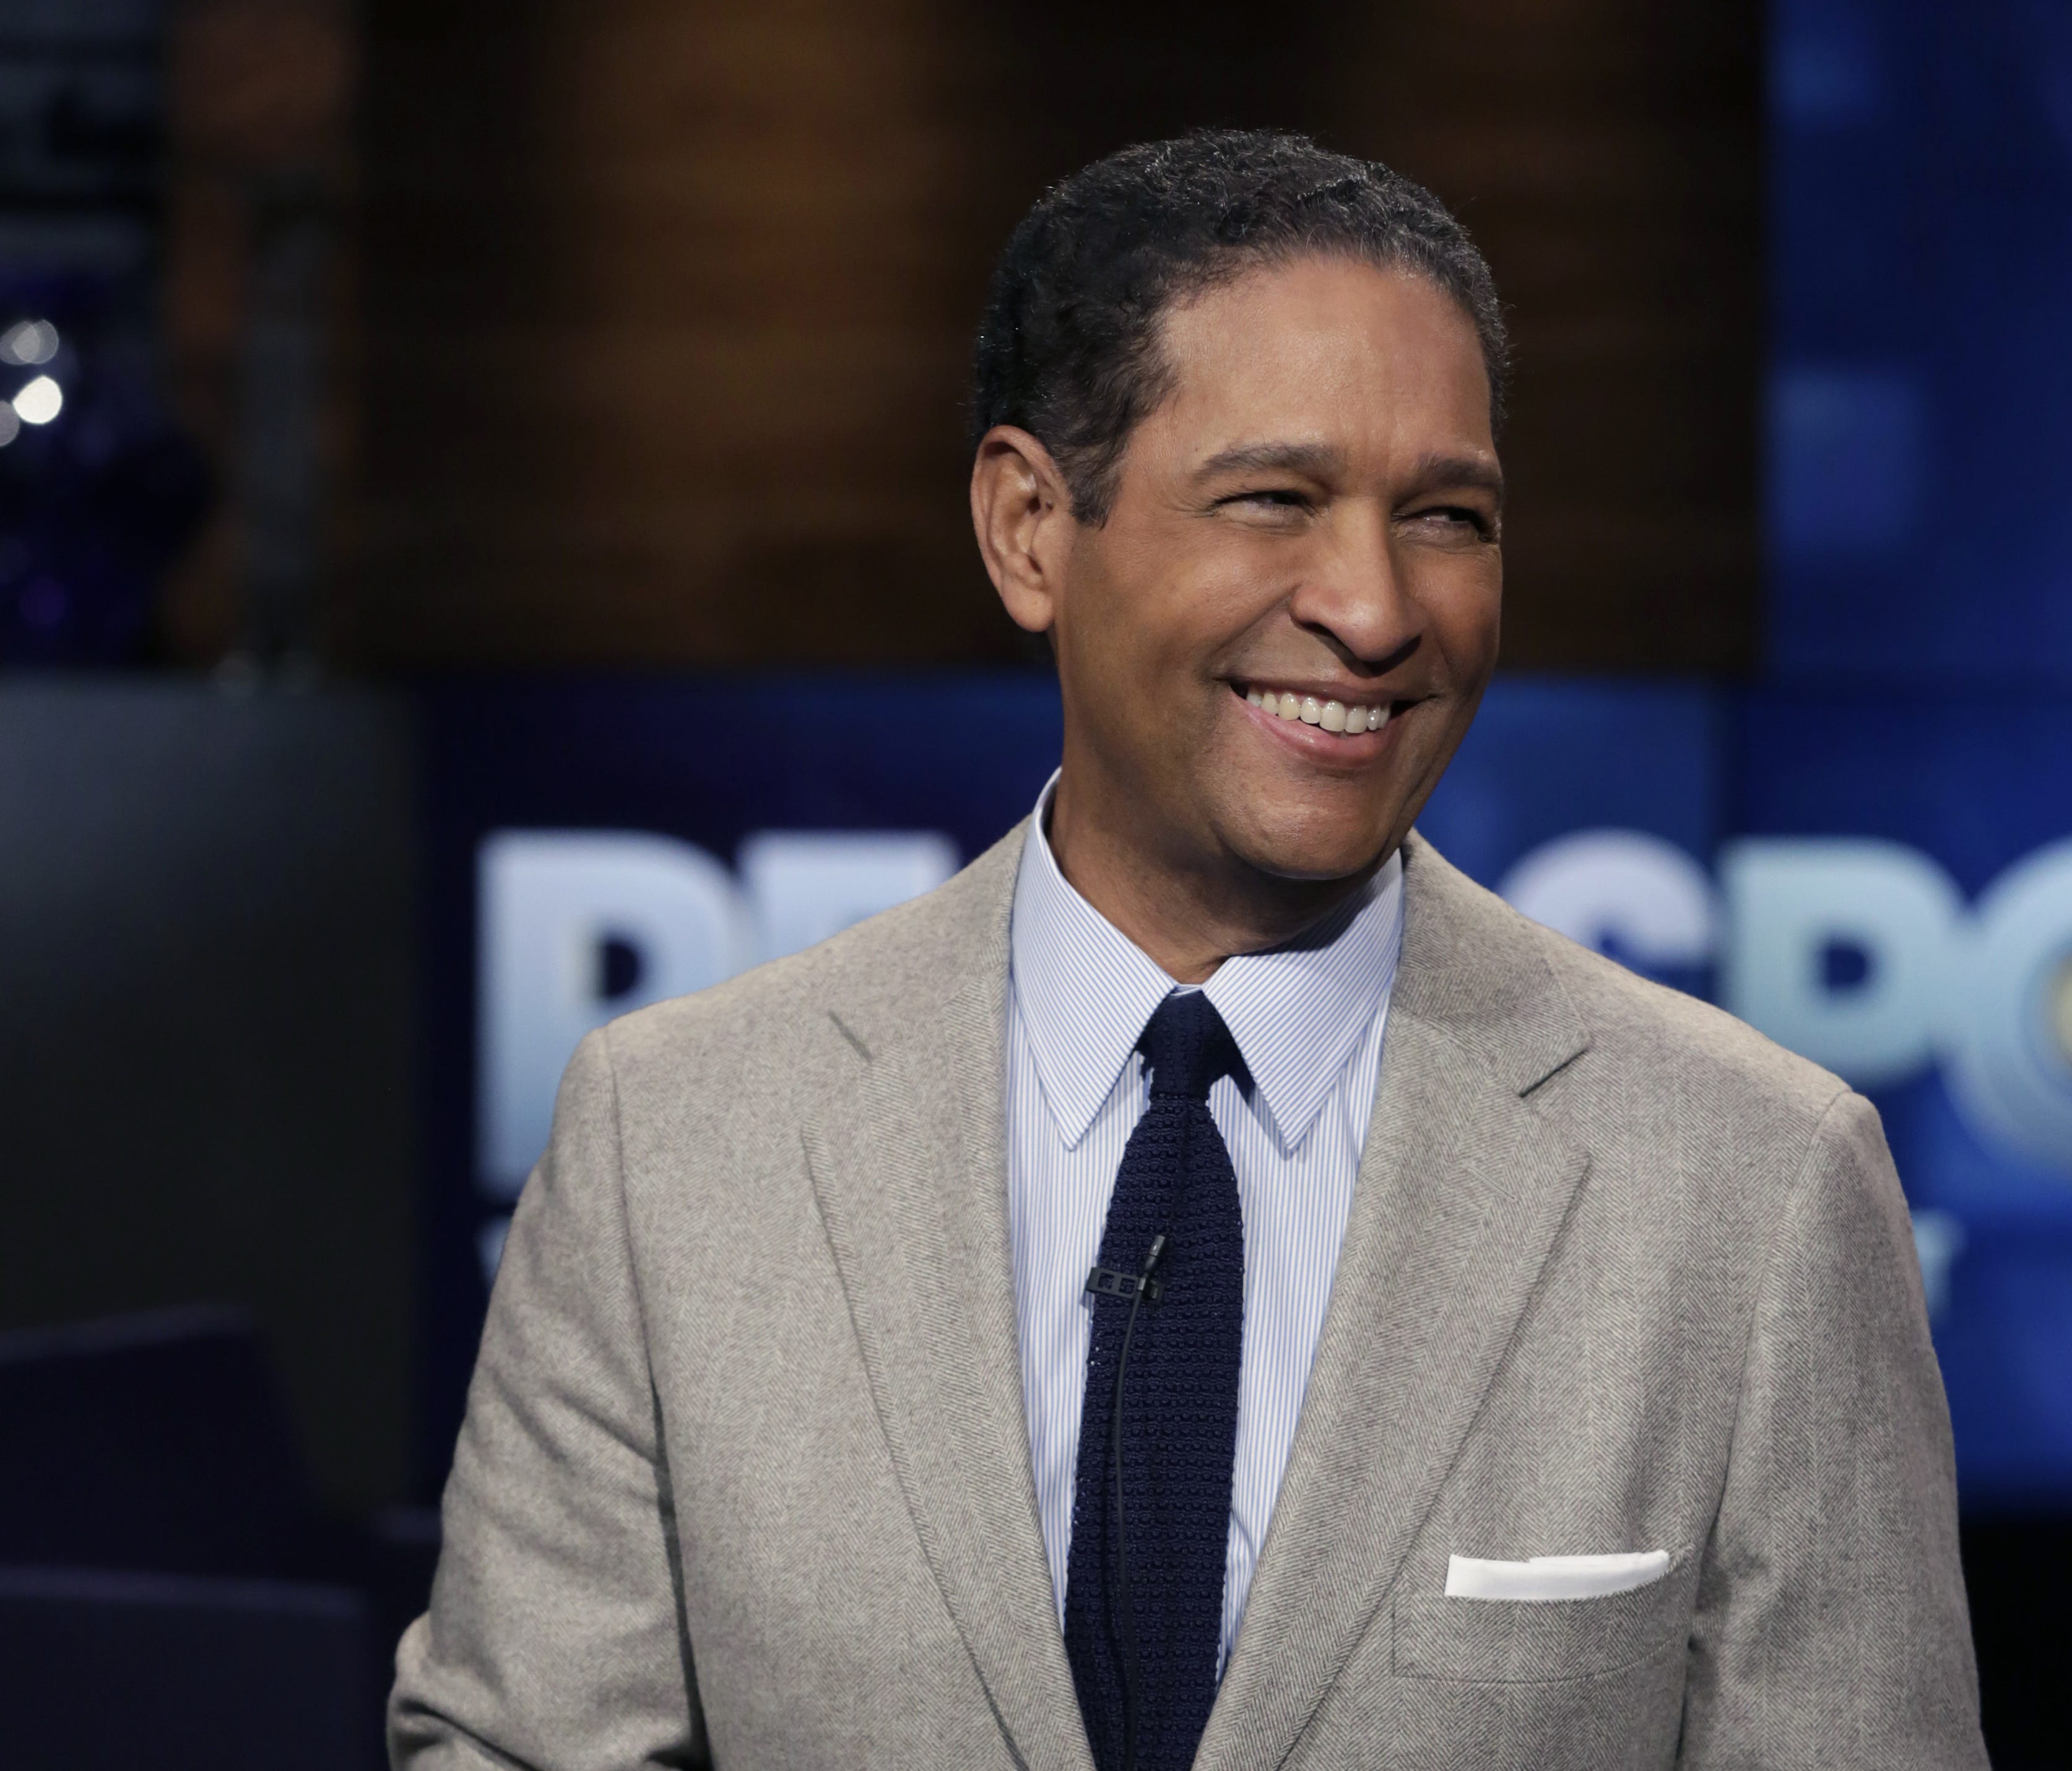 Bryant Gumbel thanked the president for energizing today's athlete.